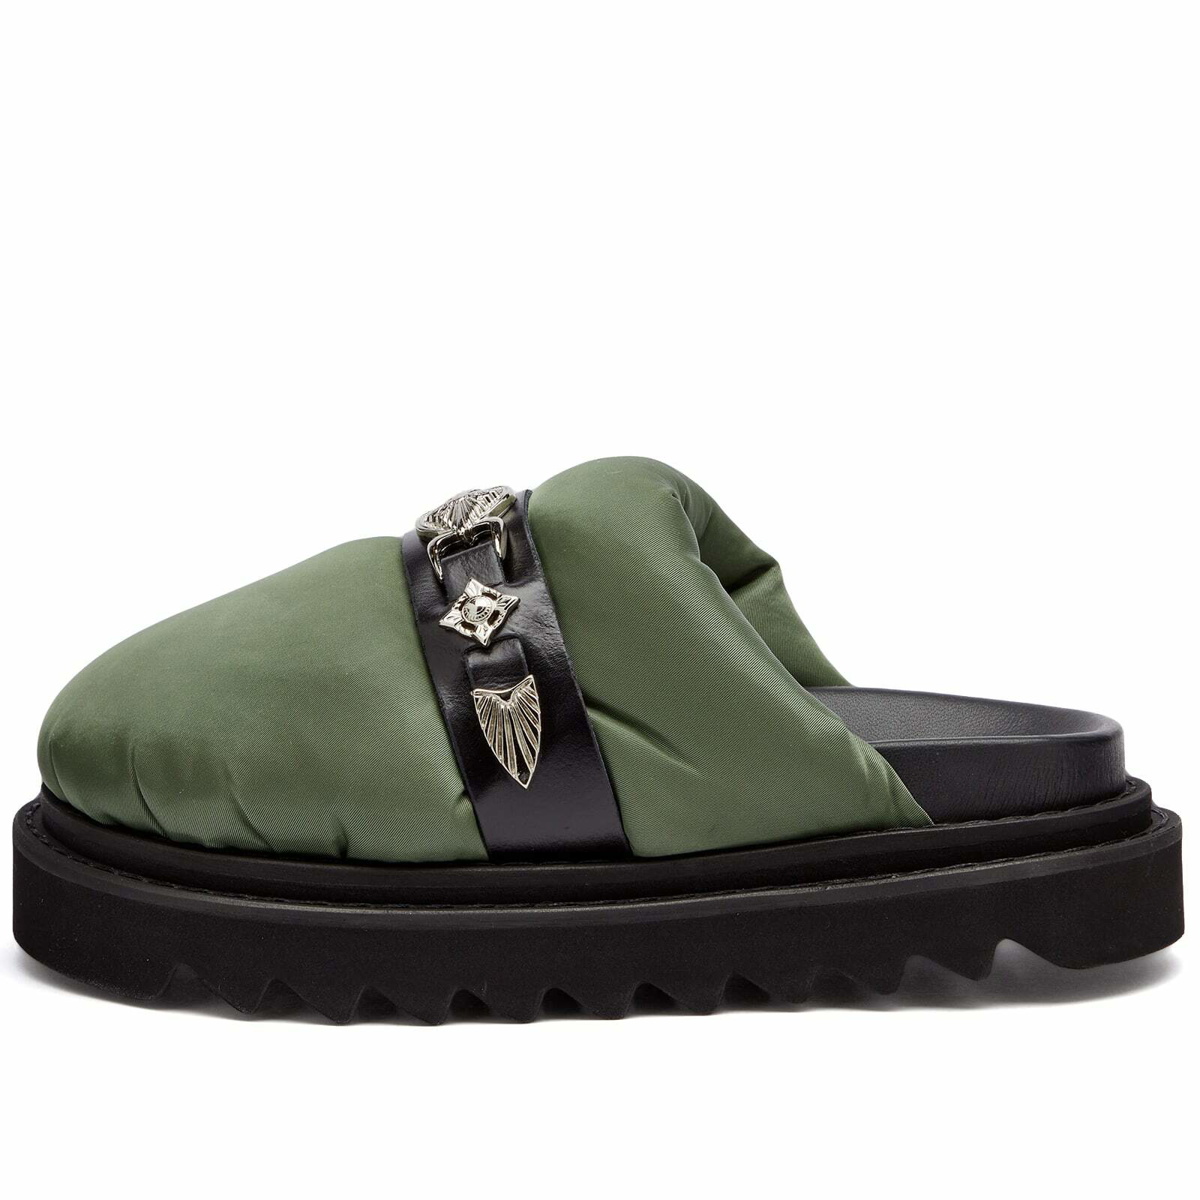 Toga Pulla Women's Padded Slides in Green Toga Pulla